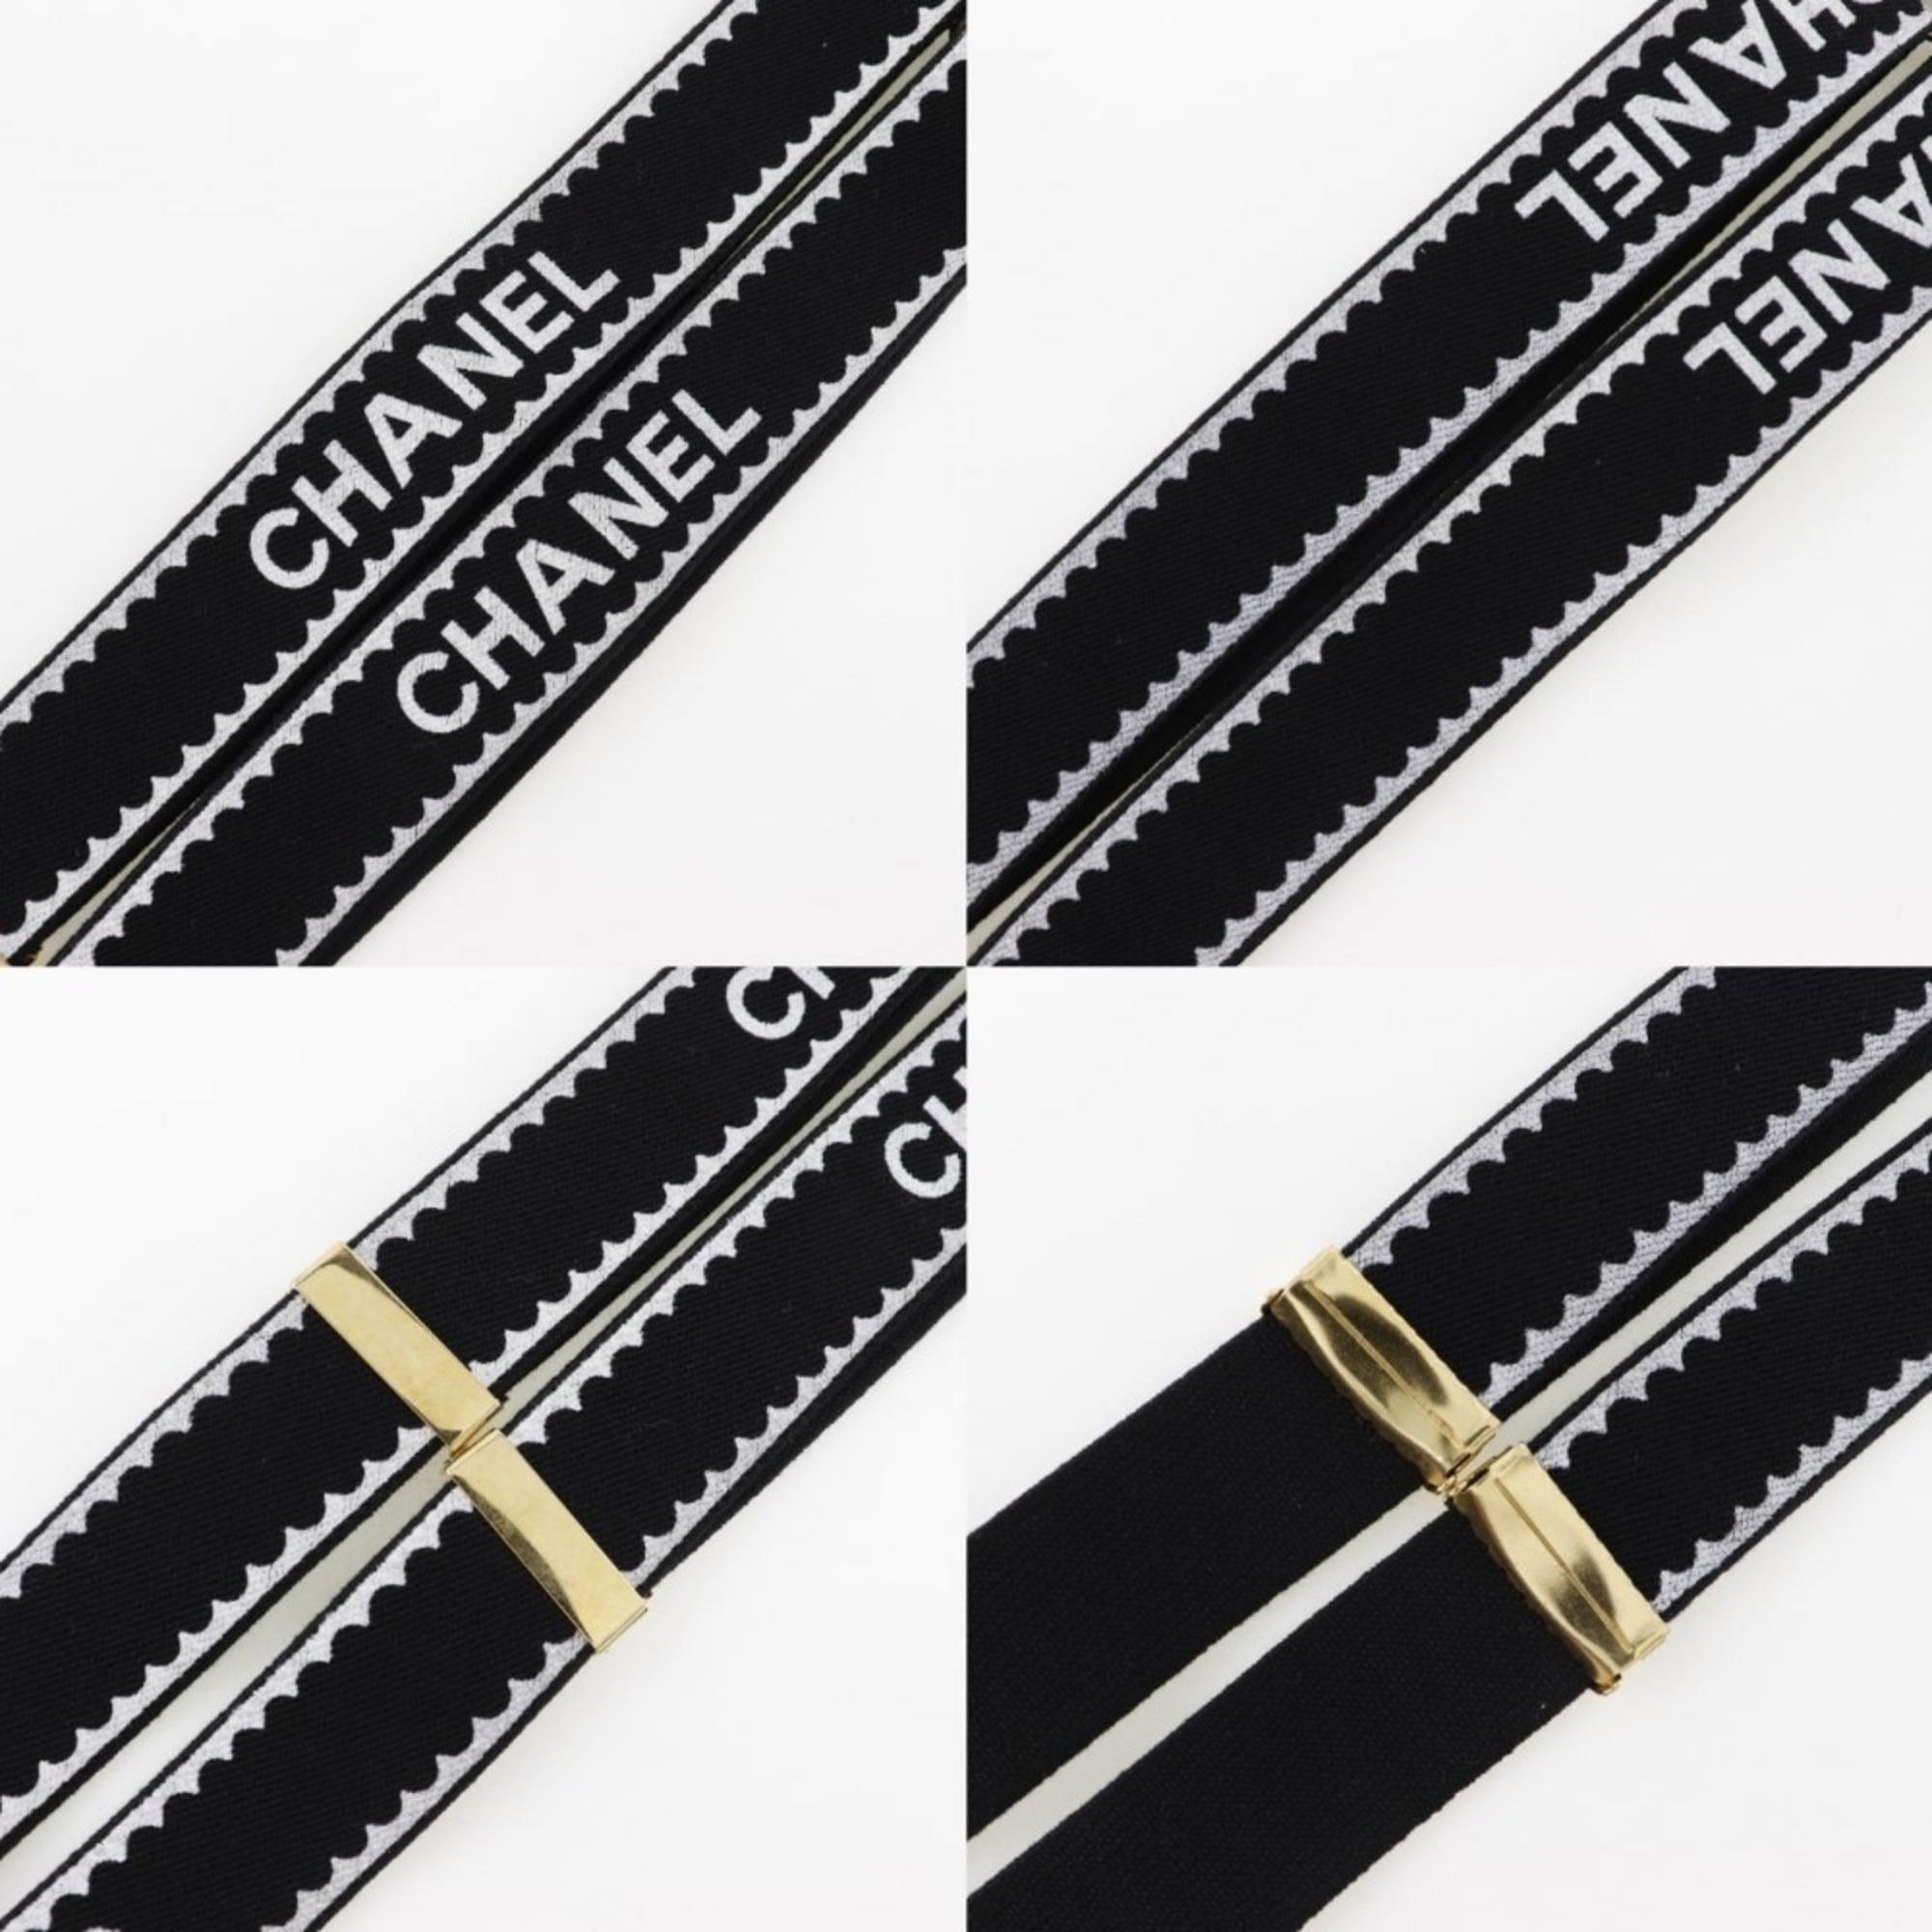 CHANEL Suspenders, Rubber x Leather, Logo, Women's, H141924950